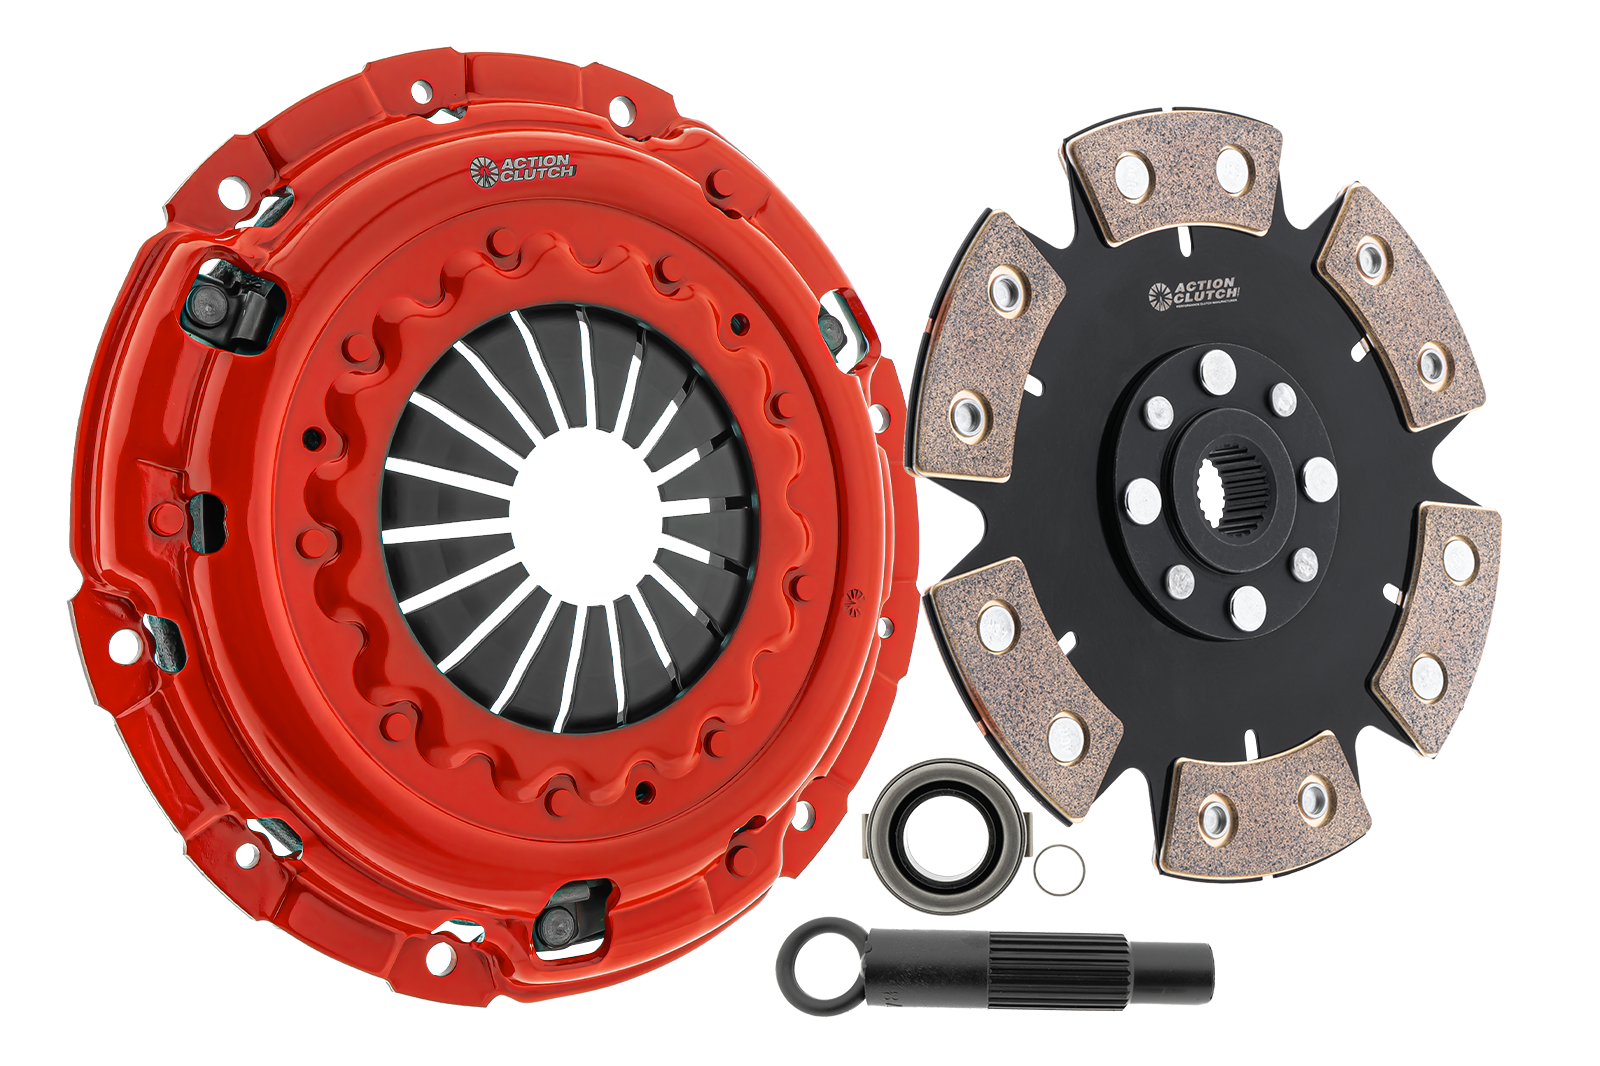 Stage 4 Clutch Kit (1MD) for Infiniti G37 2008-2013 3.7L (VQ37VHR) Without Heavy Duty Concentric Slave Bearing